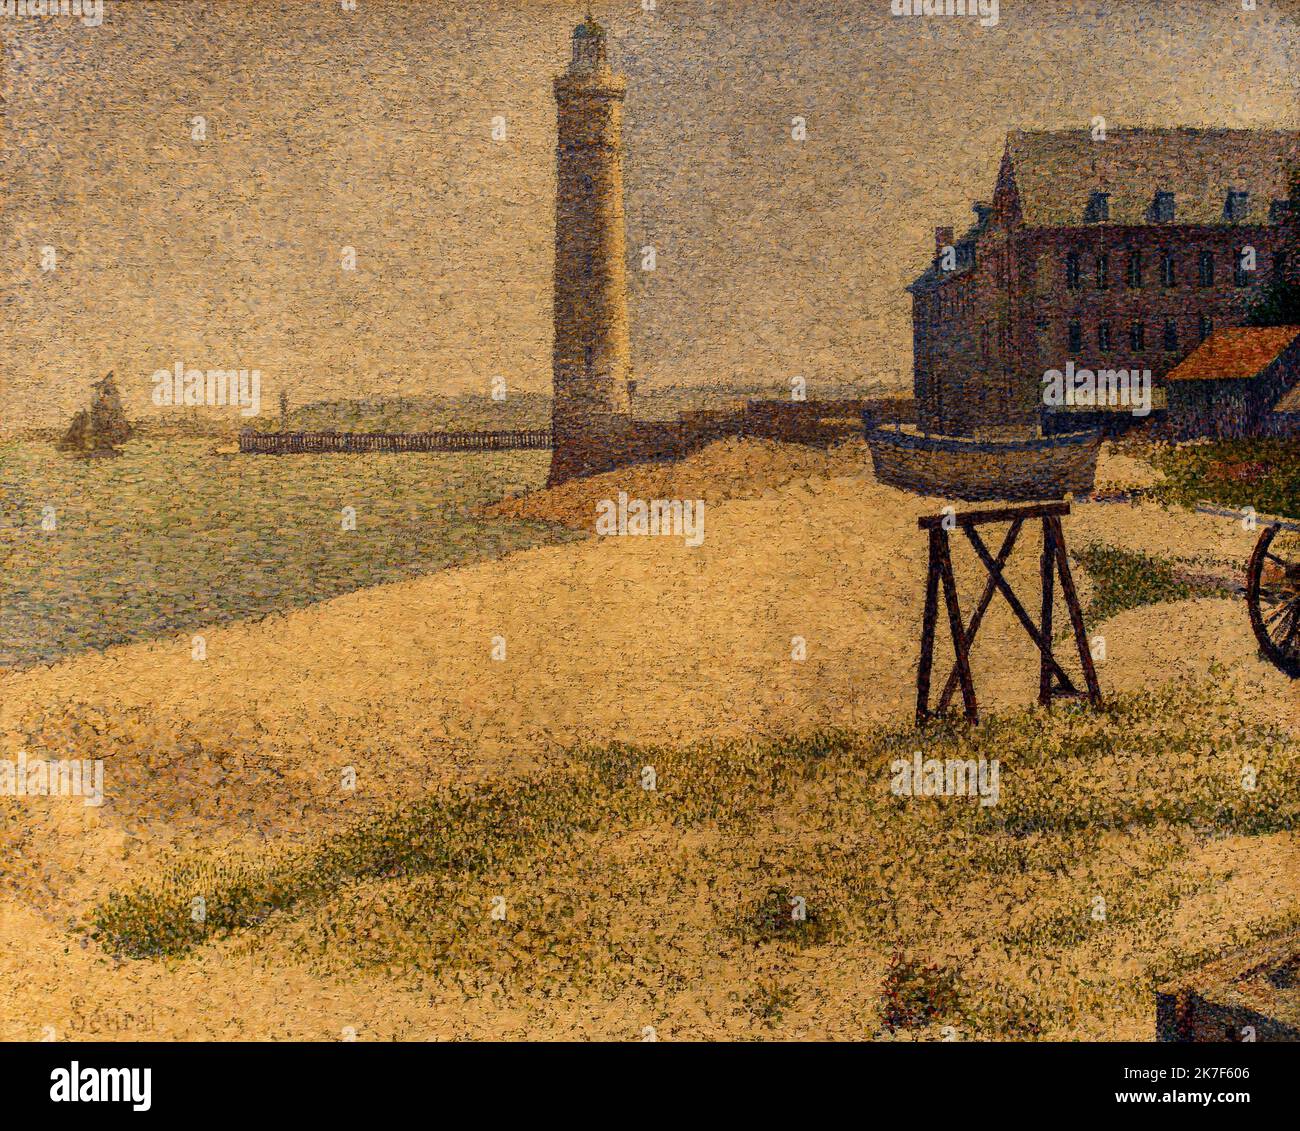 ©Active Museu/MAXPPP - ActiveMuseum 0001033.jpg / Le Phare de Honfleur, 1886 - Georges Seurat - The Lighthouse at Honfleur 1886 - / Georges Seurat / Peinture Active Museum / Le Pictorium Bank (shore) ,Beach ,Blue sky ,Dike ,Dune ,Horizontal ,House ,Impressionism ,Light ,Lighthouse ,Pointillism ,Sailboat ,Sailing boat ,Small boat ,Calvados (french department) ,Europe ,France ,Honfleur ,Lower Normandy ,Normandy ,Western Europe ,19th century ,Georges Seurat ,Painting ,  Stock Photo